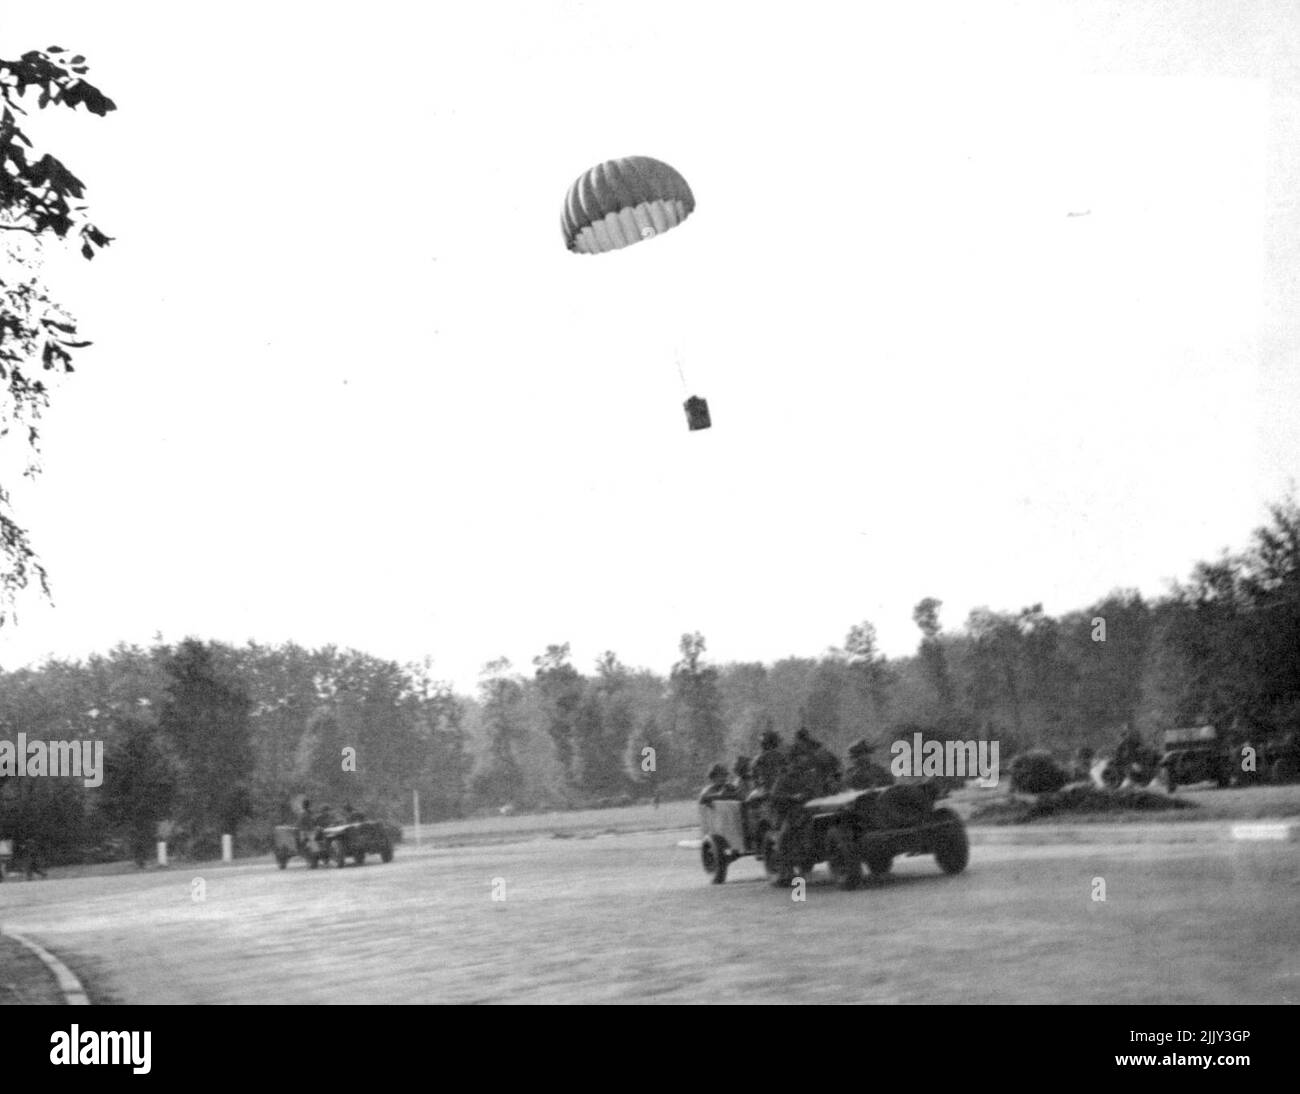 cture Of British Airbourne Forces In Holland -- A supply basket dropping on a ***** to be collected by airborne forces with jeeps. When the 1st., Allied the 1st. Allied Airbourne army was dropped in Holland, photographers of the Army Film and Photographic Unit were with them. This is one of the first photographs received back from them. One of the photographers writes in a letter dated Sep. 20th., 'This is the fourth day if fighting an camera work is almost of the question. All day we have been under shell, morter and machine gunfire. September 28, 1944. (Photo by British Official Photograph). Stock Photo